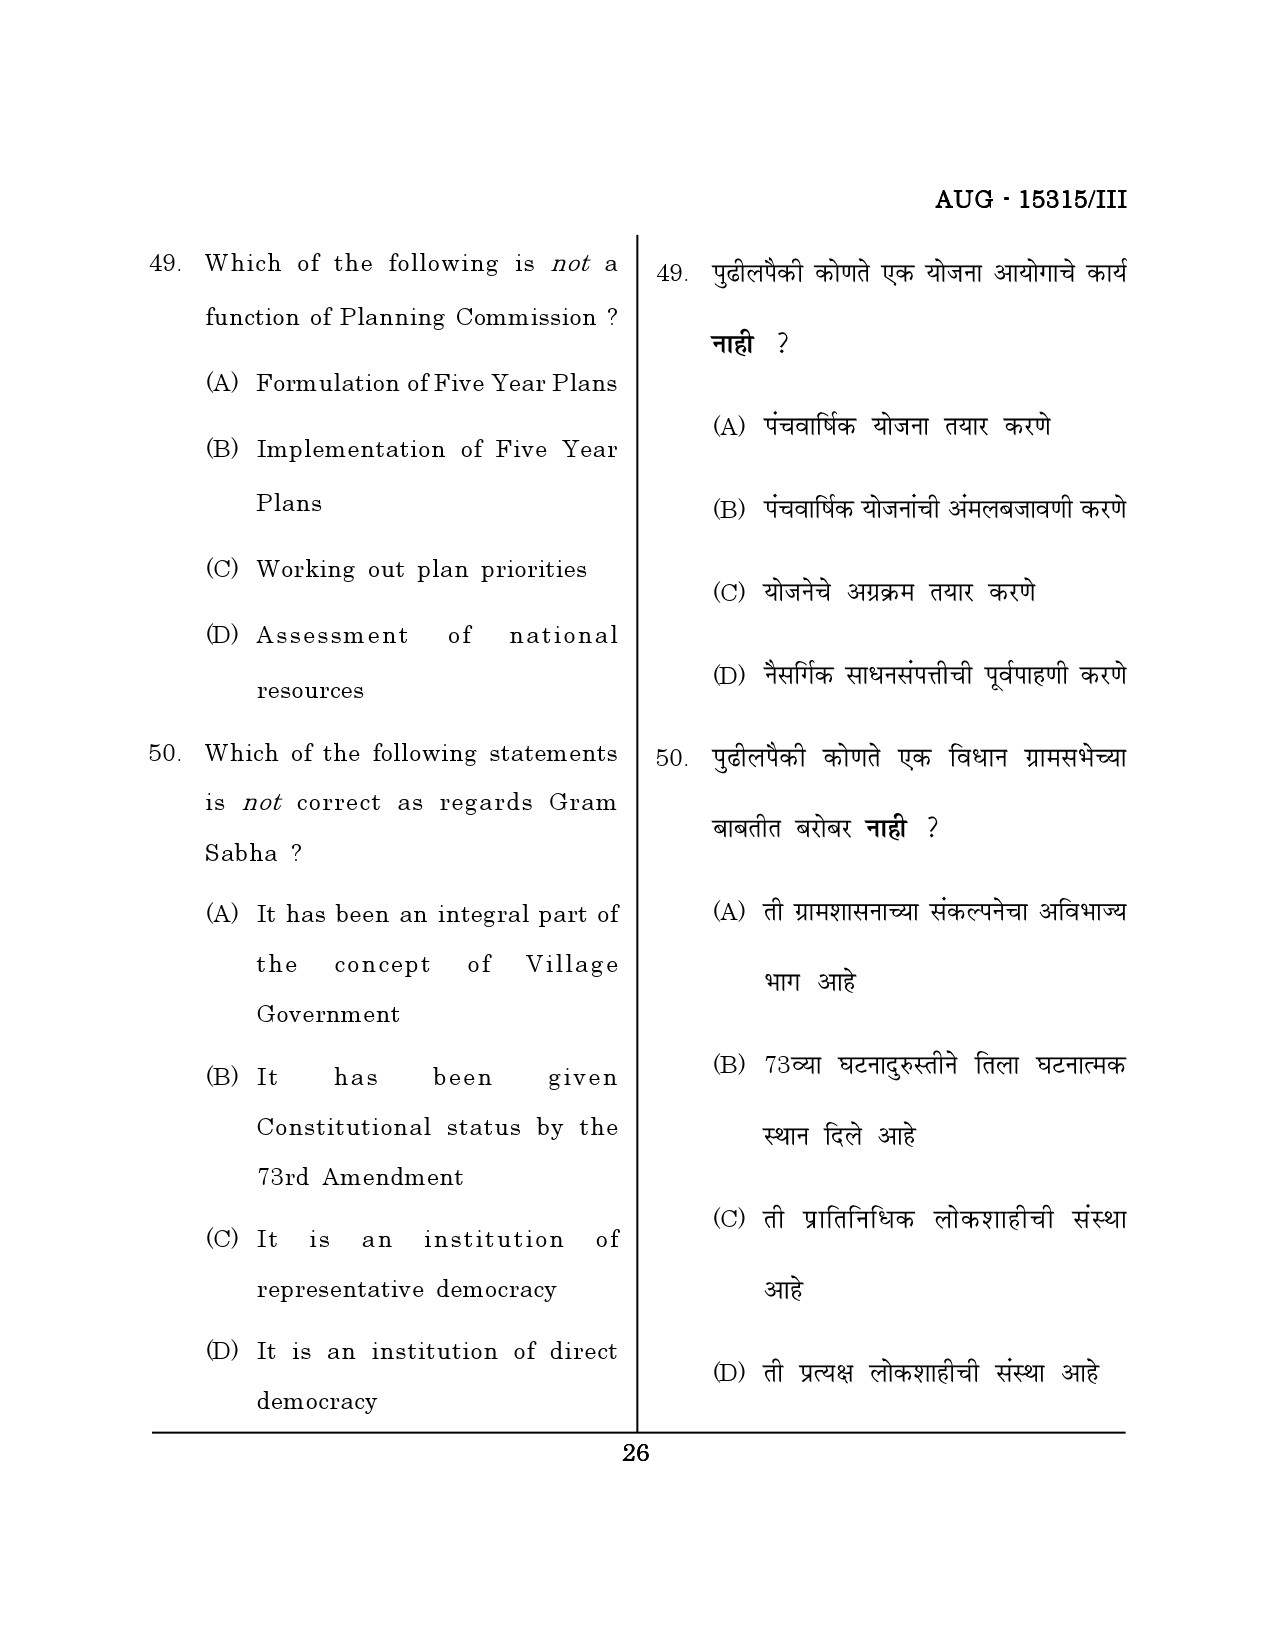 Maharashtra SET Political Science Question Paper III August 2015 25